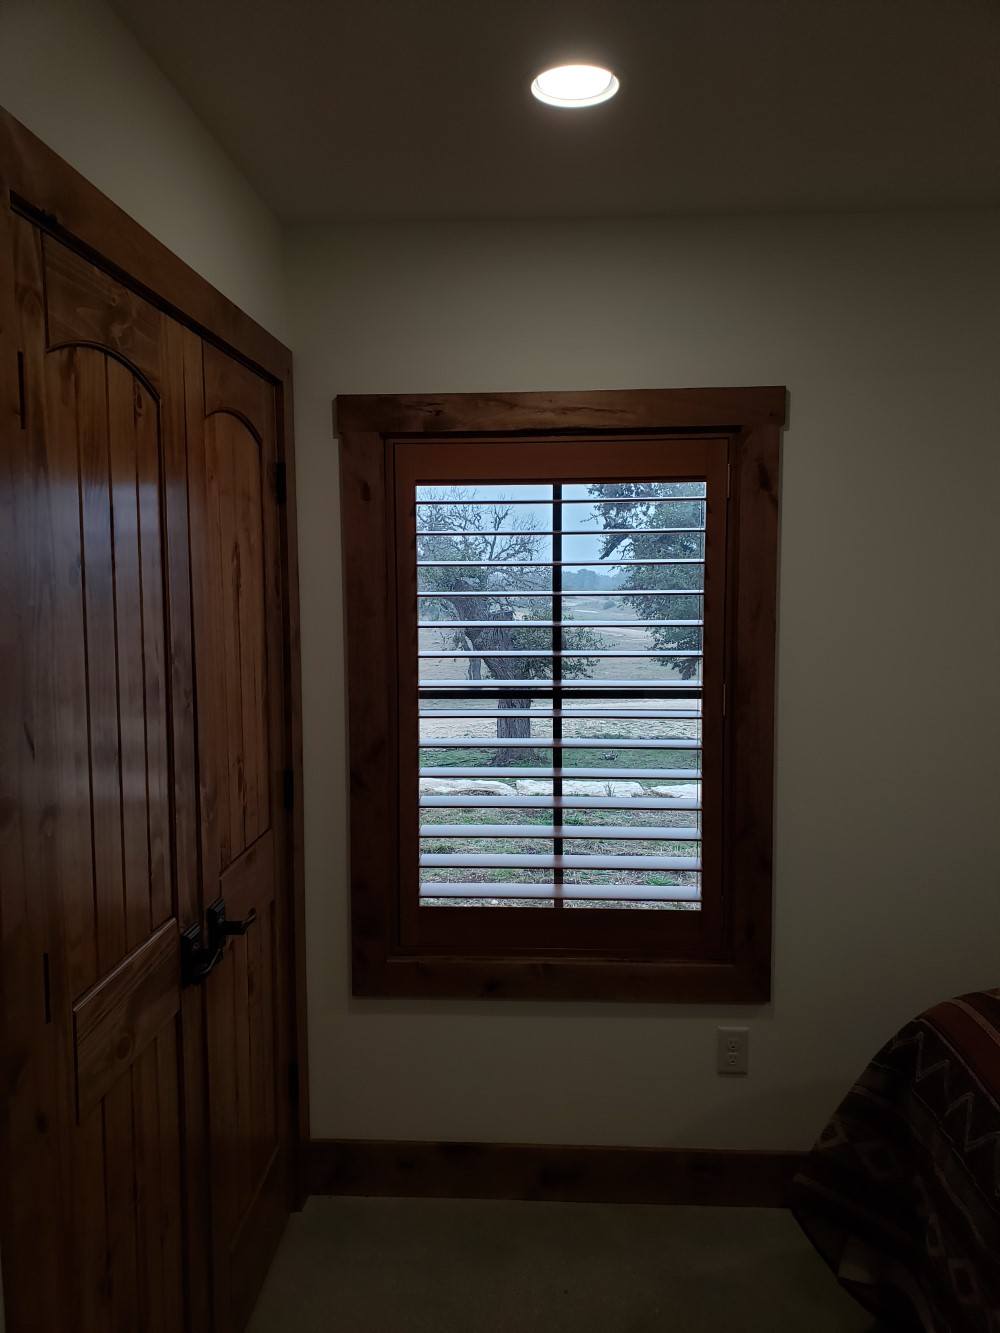 Latest Projects - Hunter Douglas New Style Shutters installed in Medina, Texas